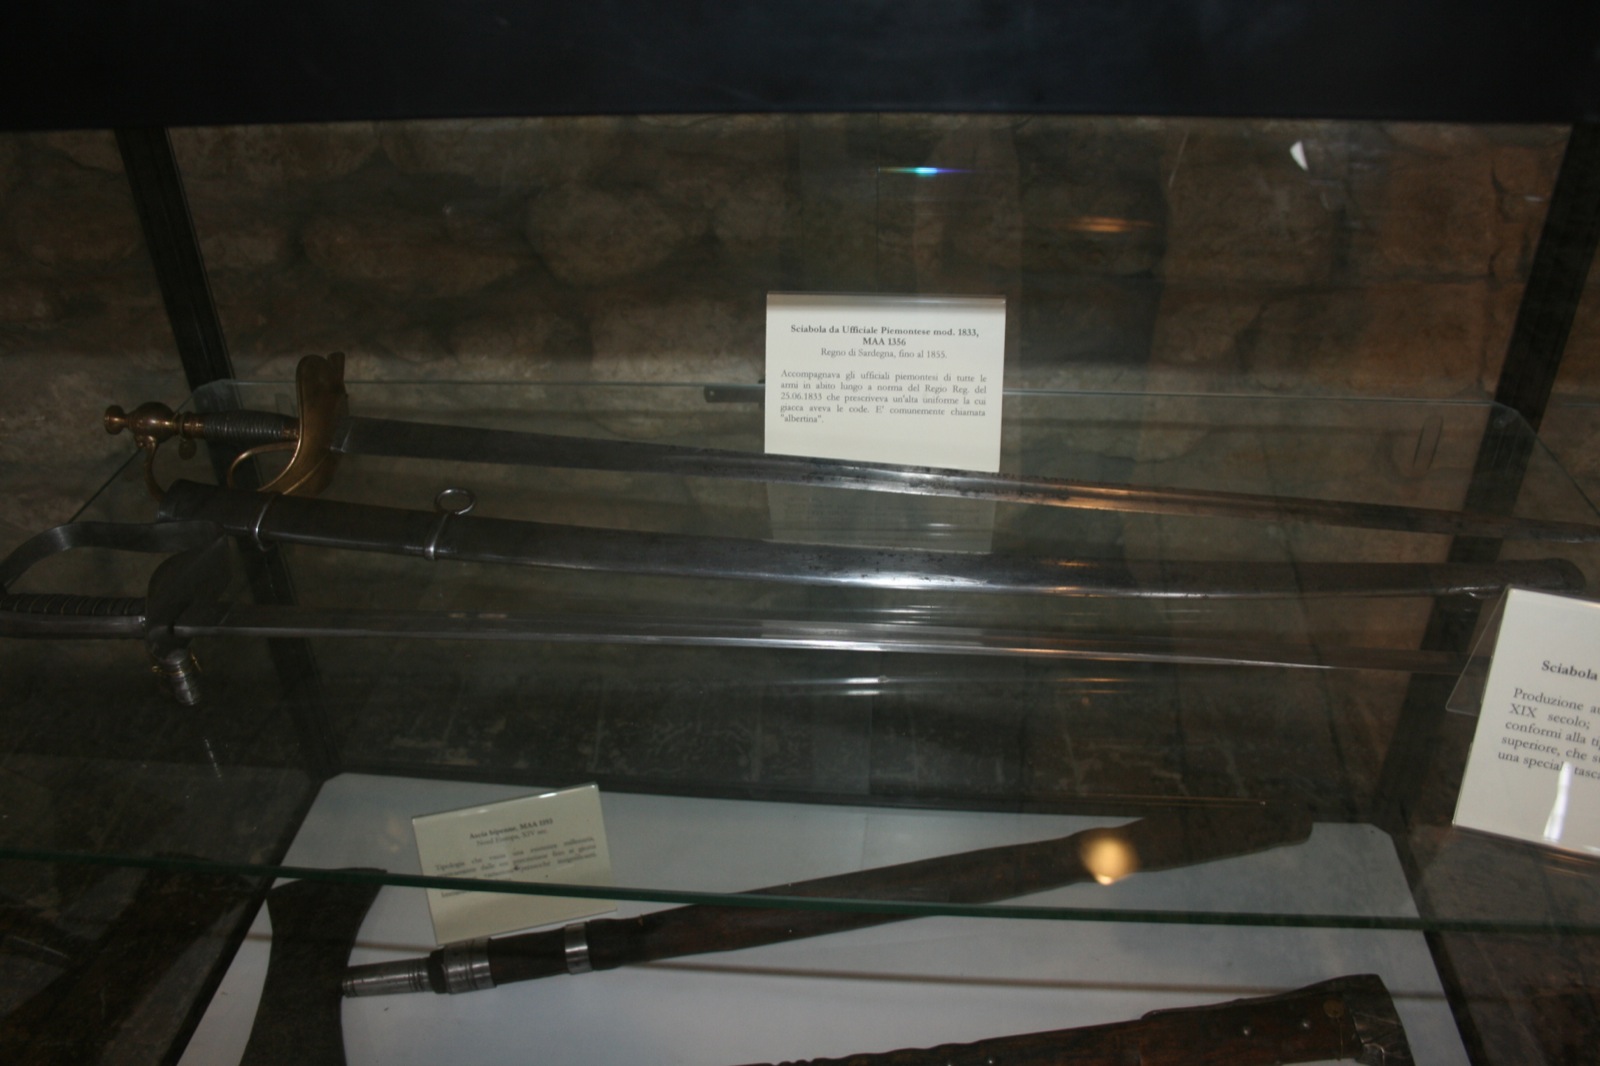 some sword shaped object in a glass case